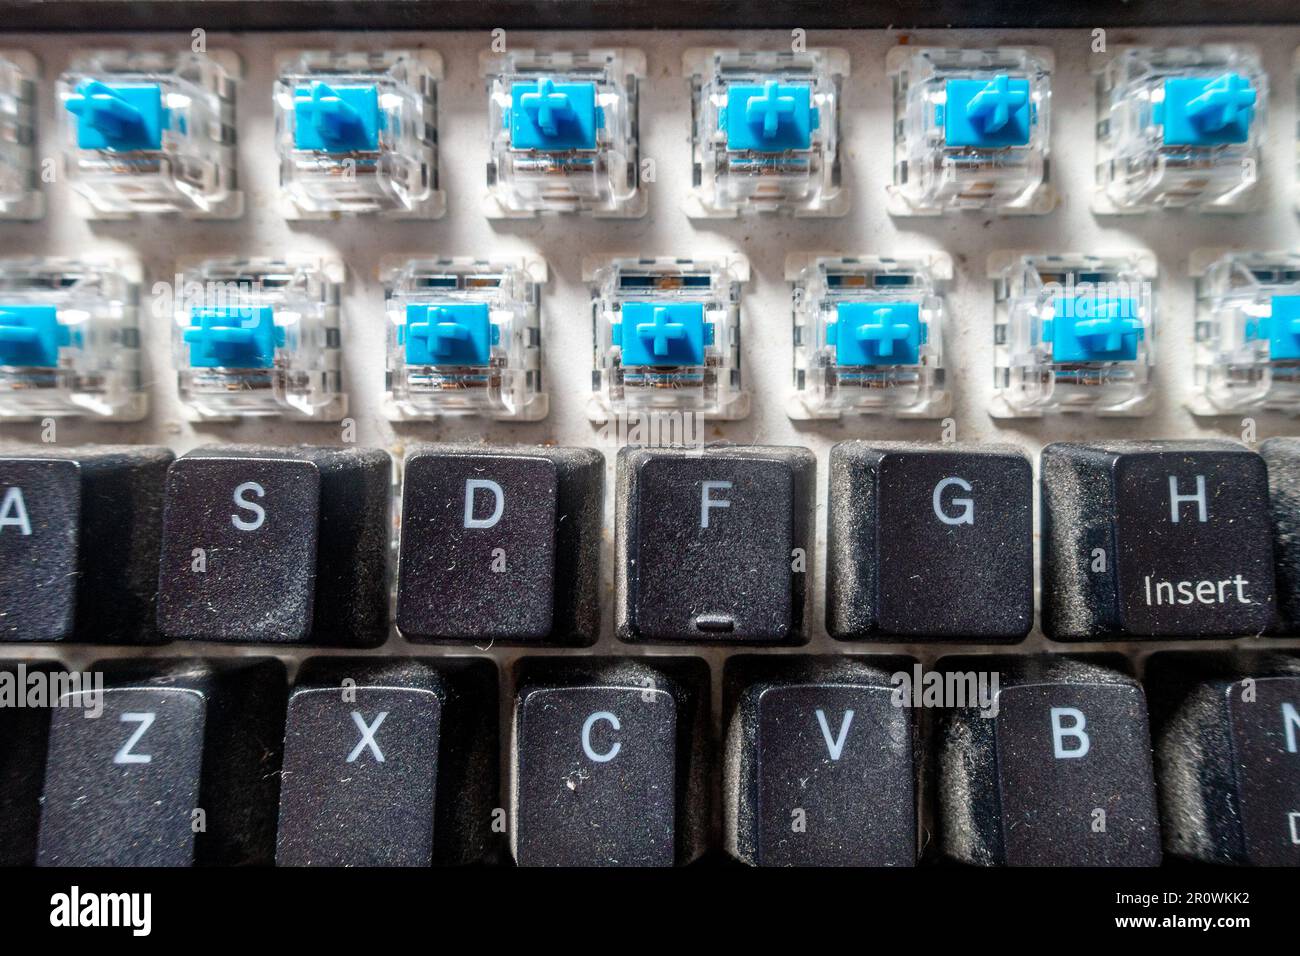 A dirty computer keyboard which has had two rows of key facias removed for cleaning revealing microswitches below Stock Photo